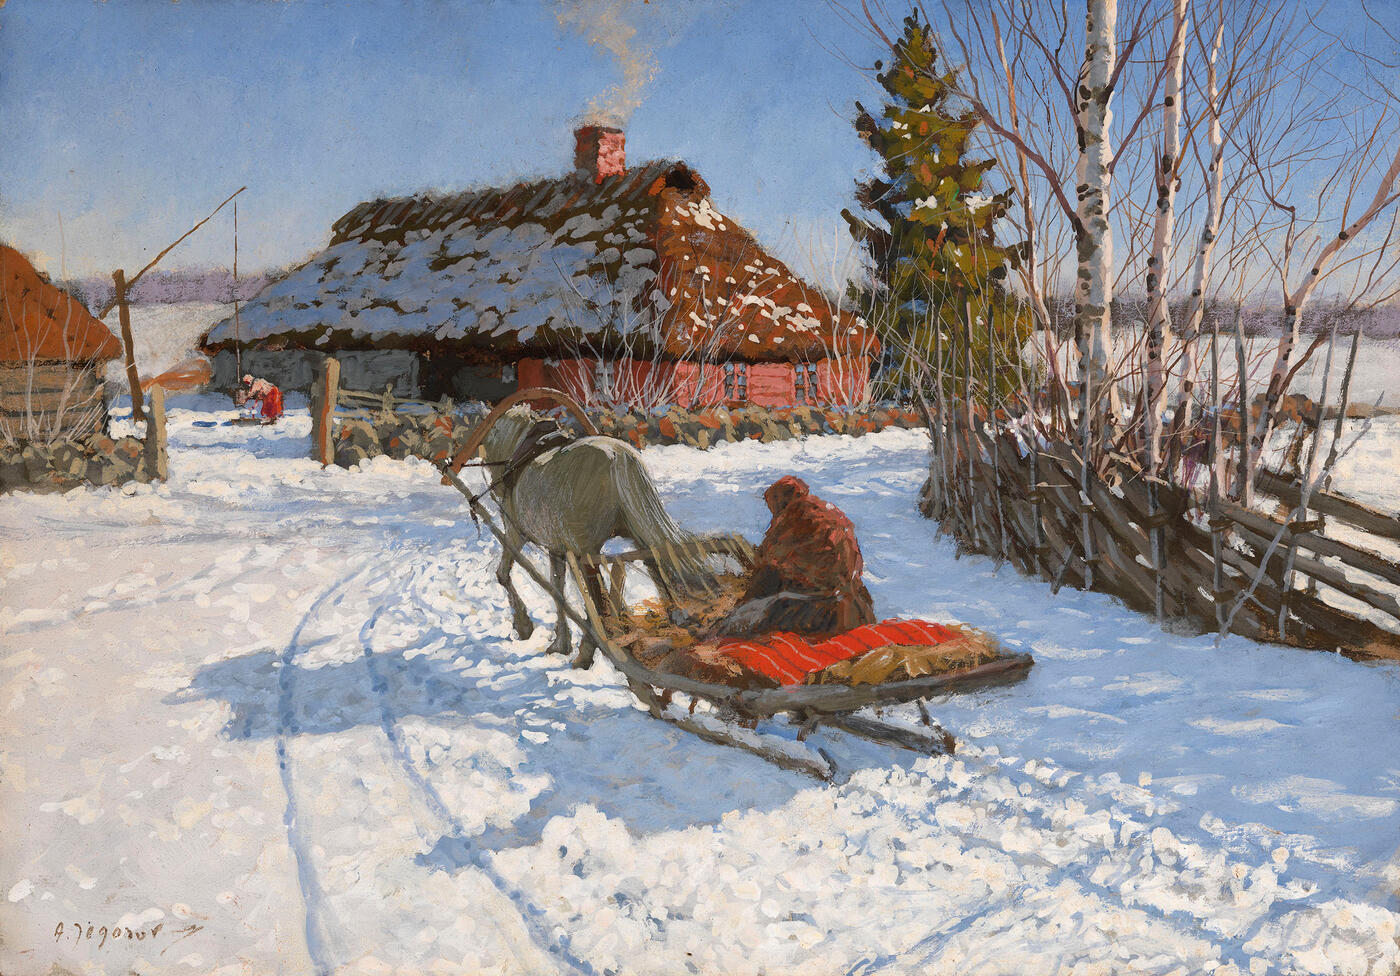 Winter Scene with Sleigh